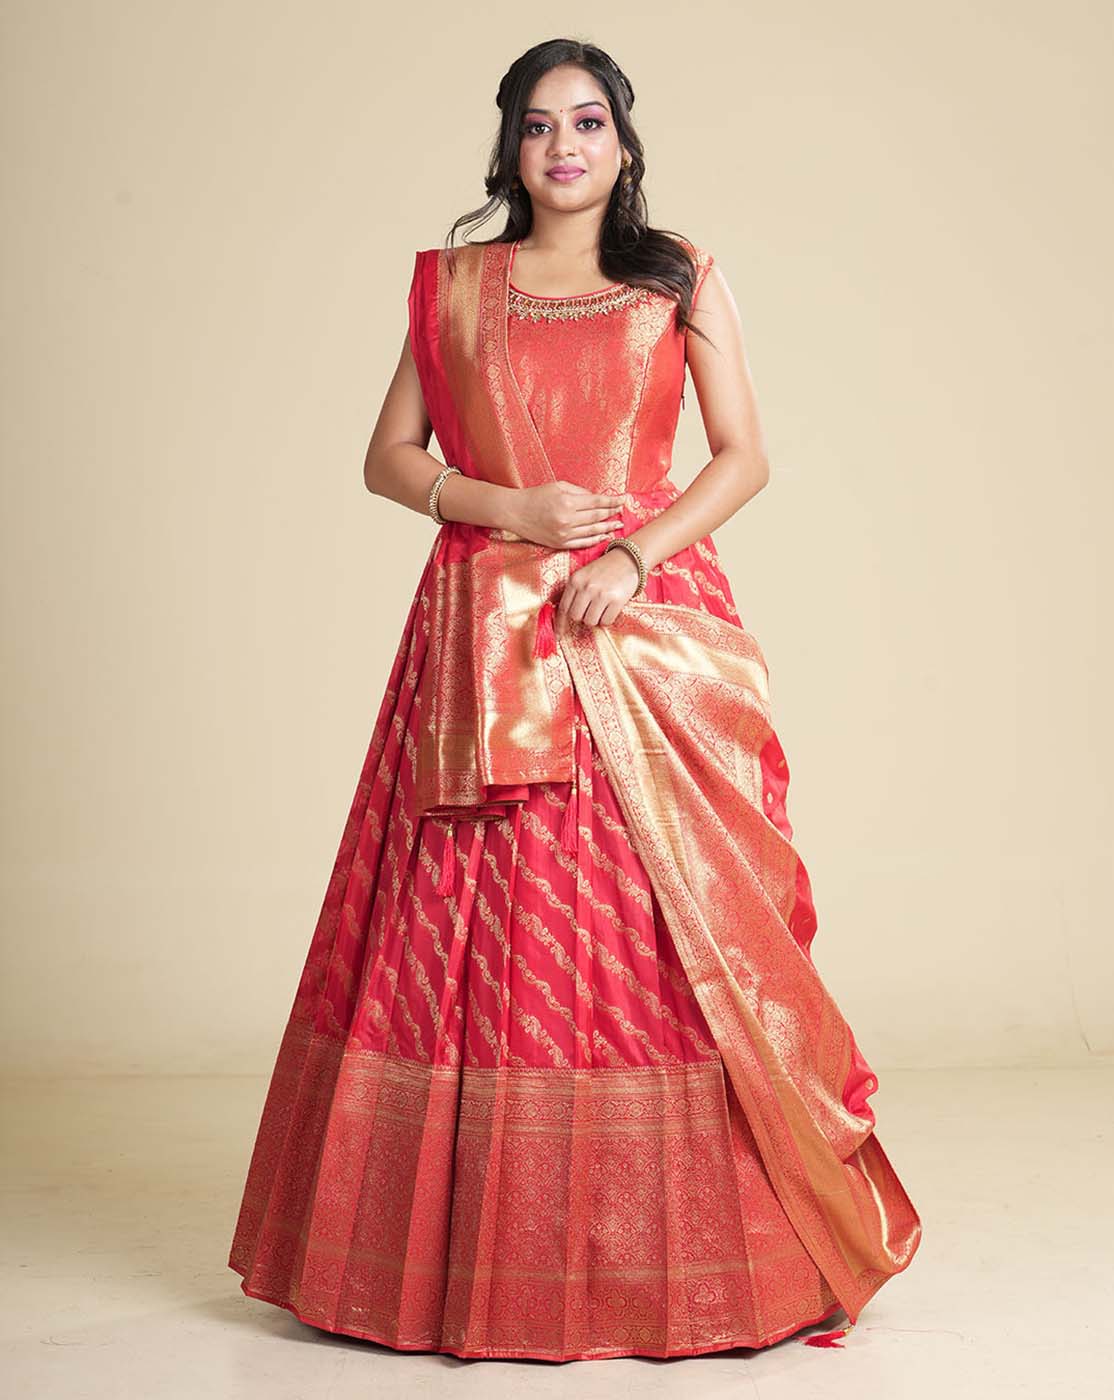 AG1759 - 36 / multi | Indian dresses, Party wear indian dresses, Indian gowns  dresses